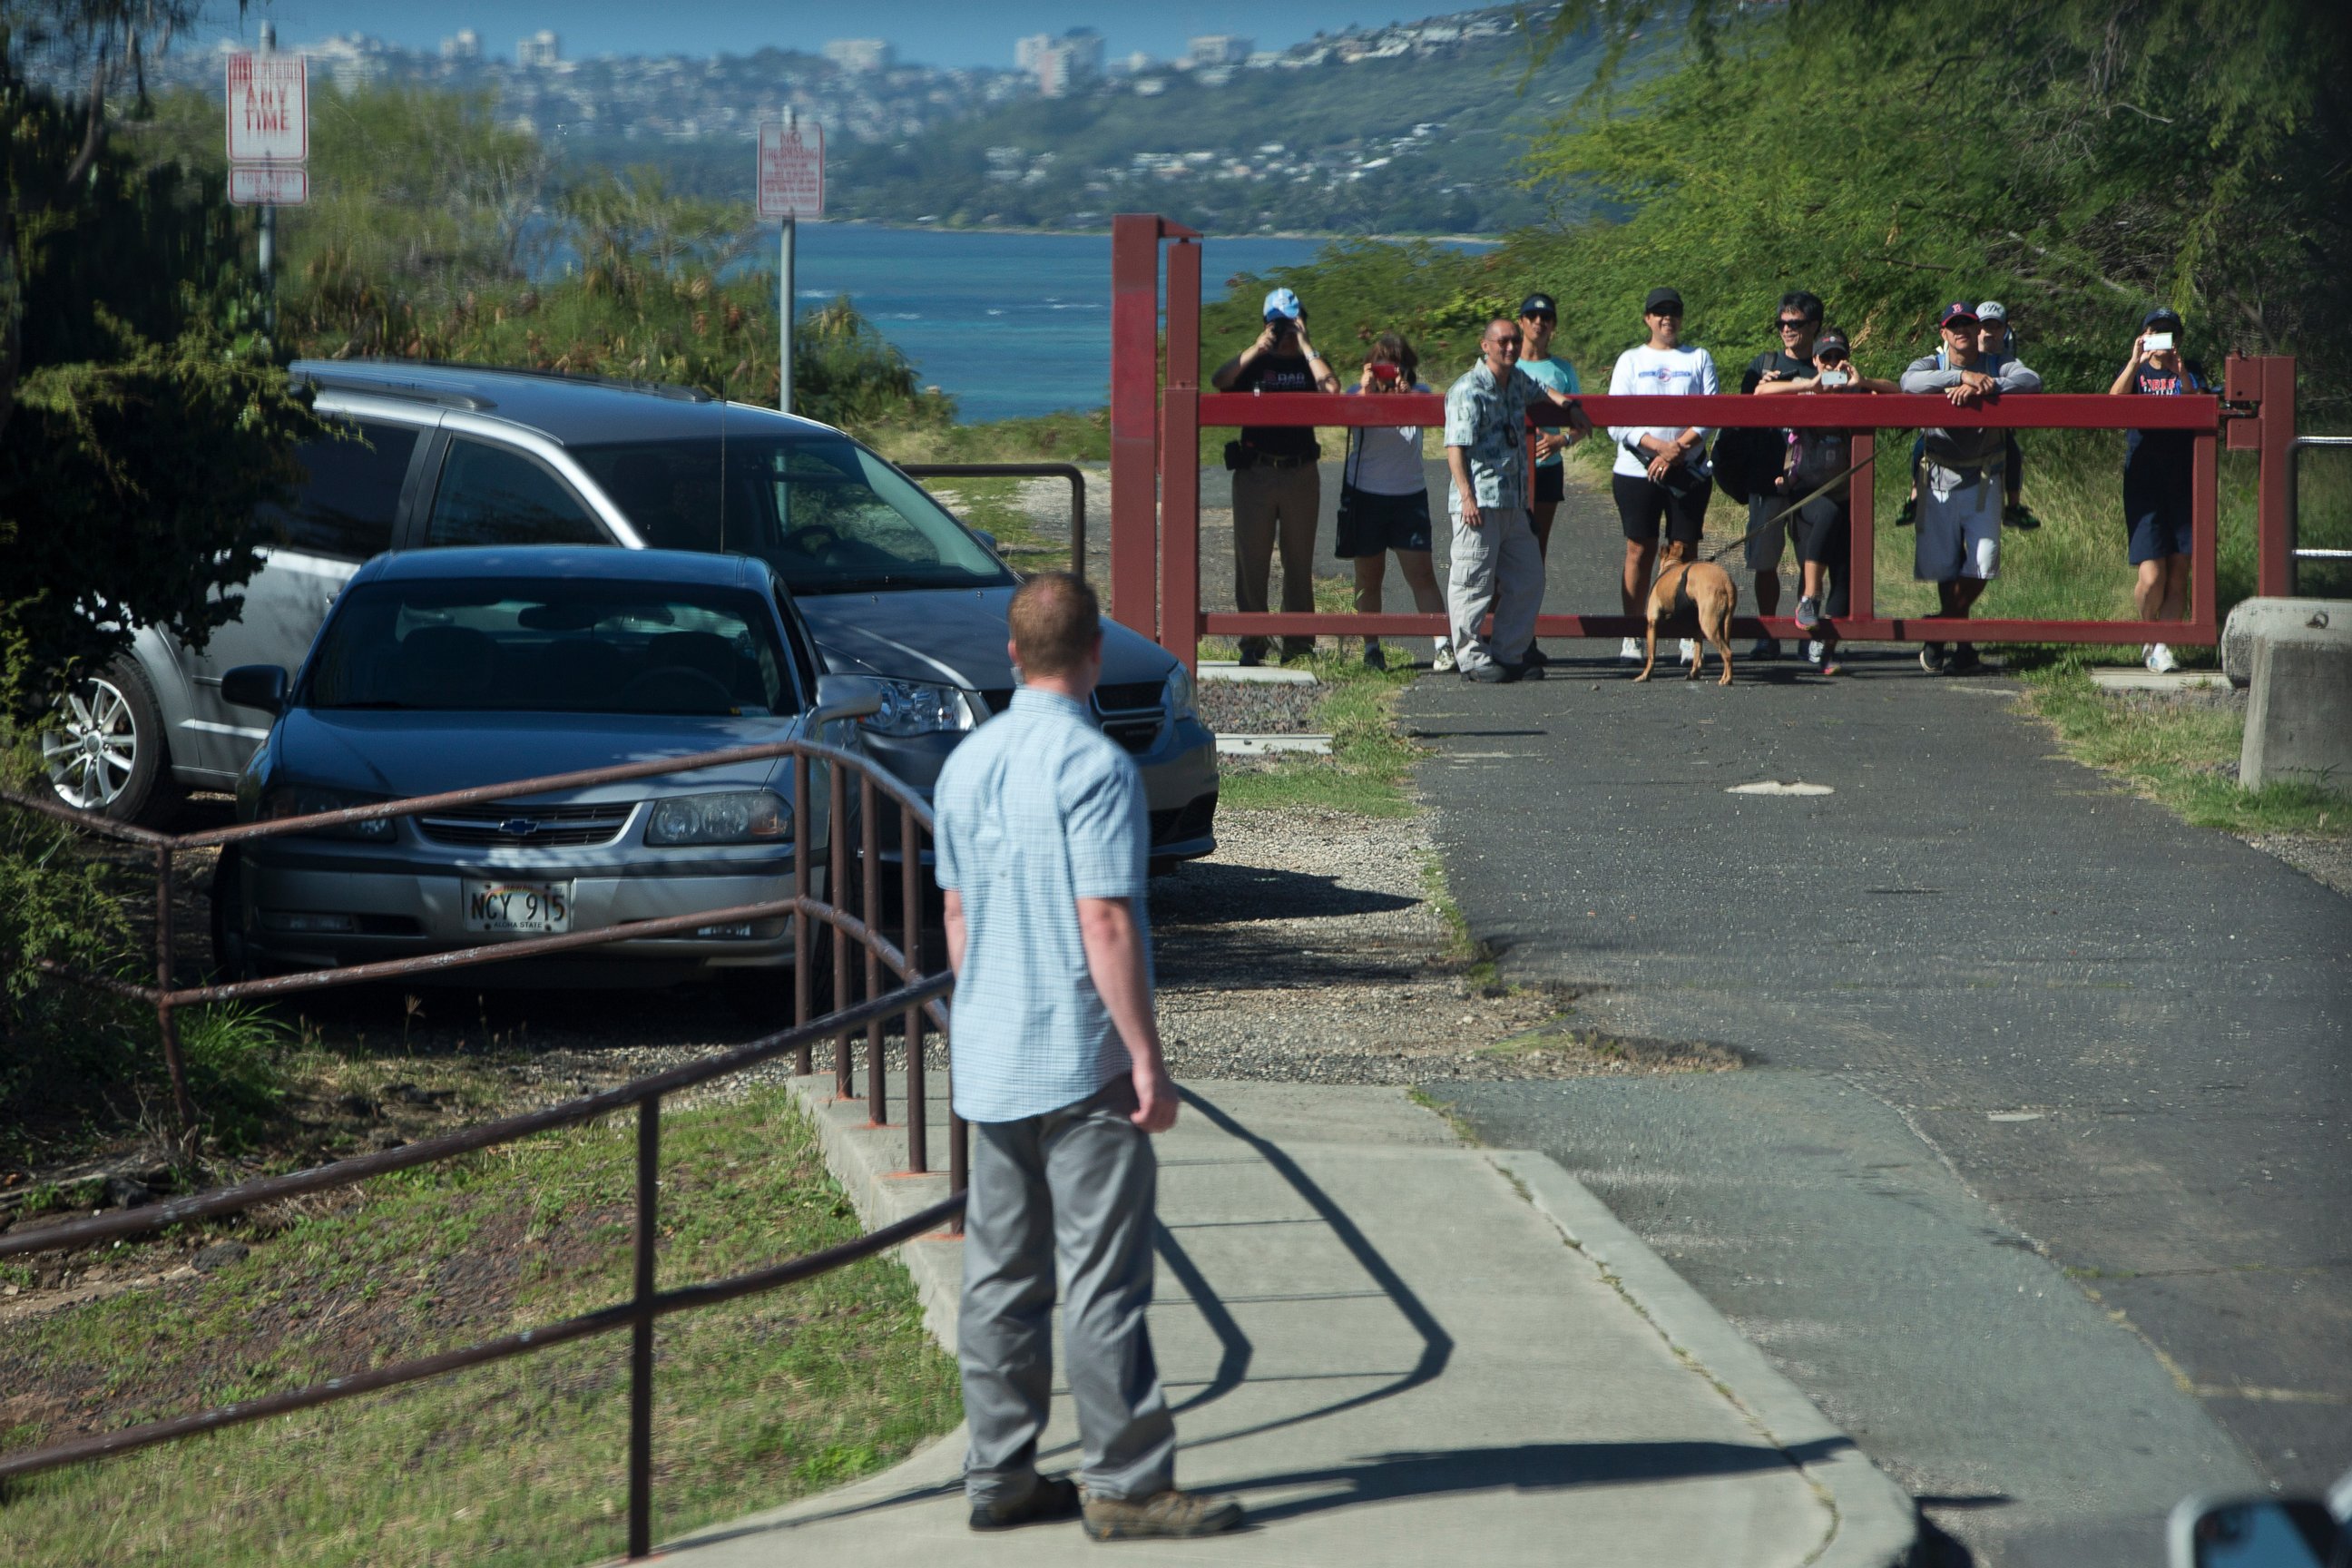 PHOTO: People vie to see past a secret service agent for a glimpse of the motorcade taking President Barack Obama and the first family to Hanauma Bay Nature Preserve, Jan. 1, 2015, on the island of Oahu in Hawaii.